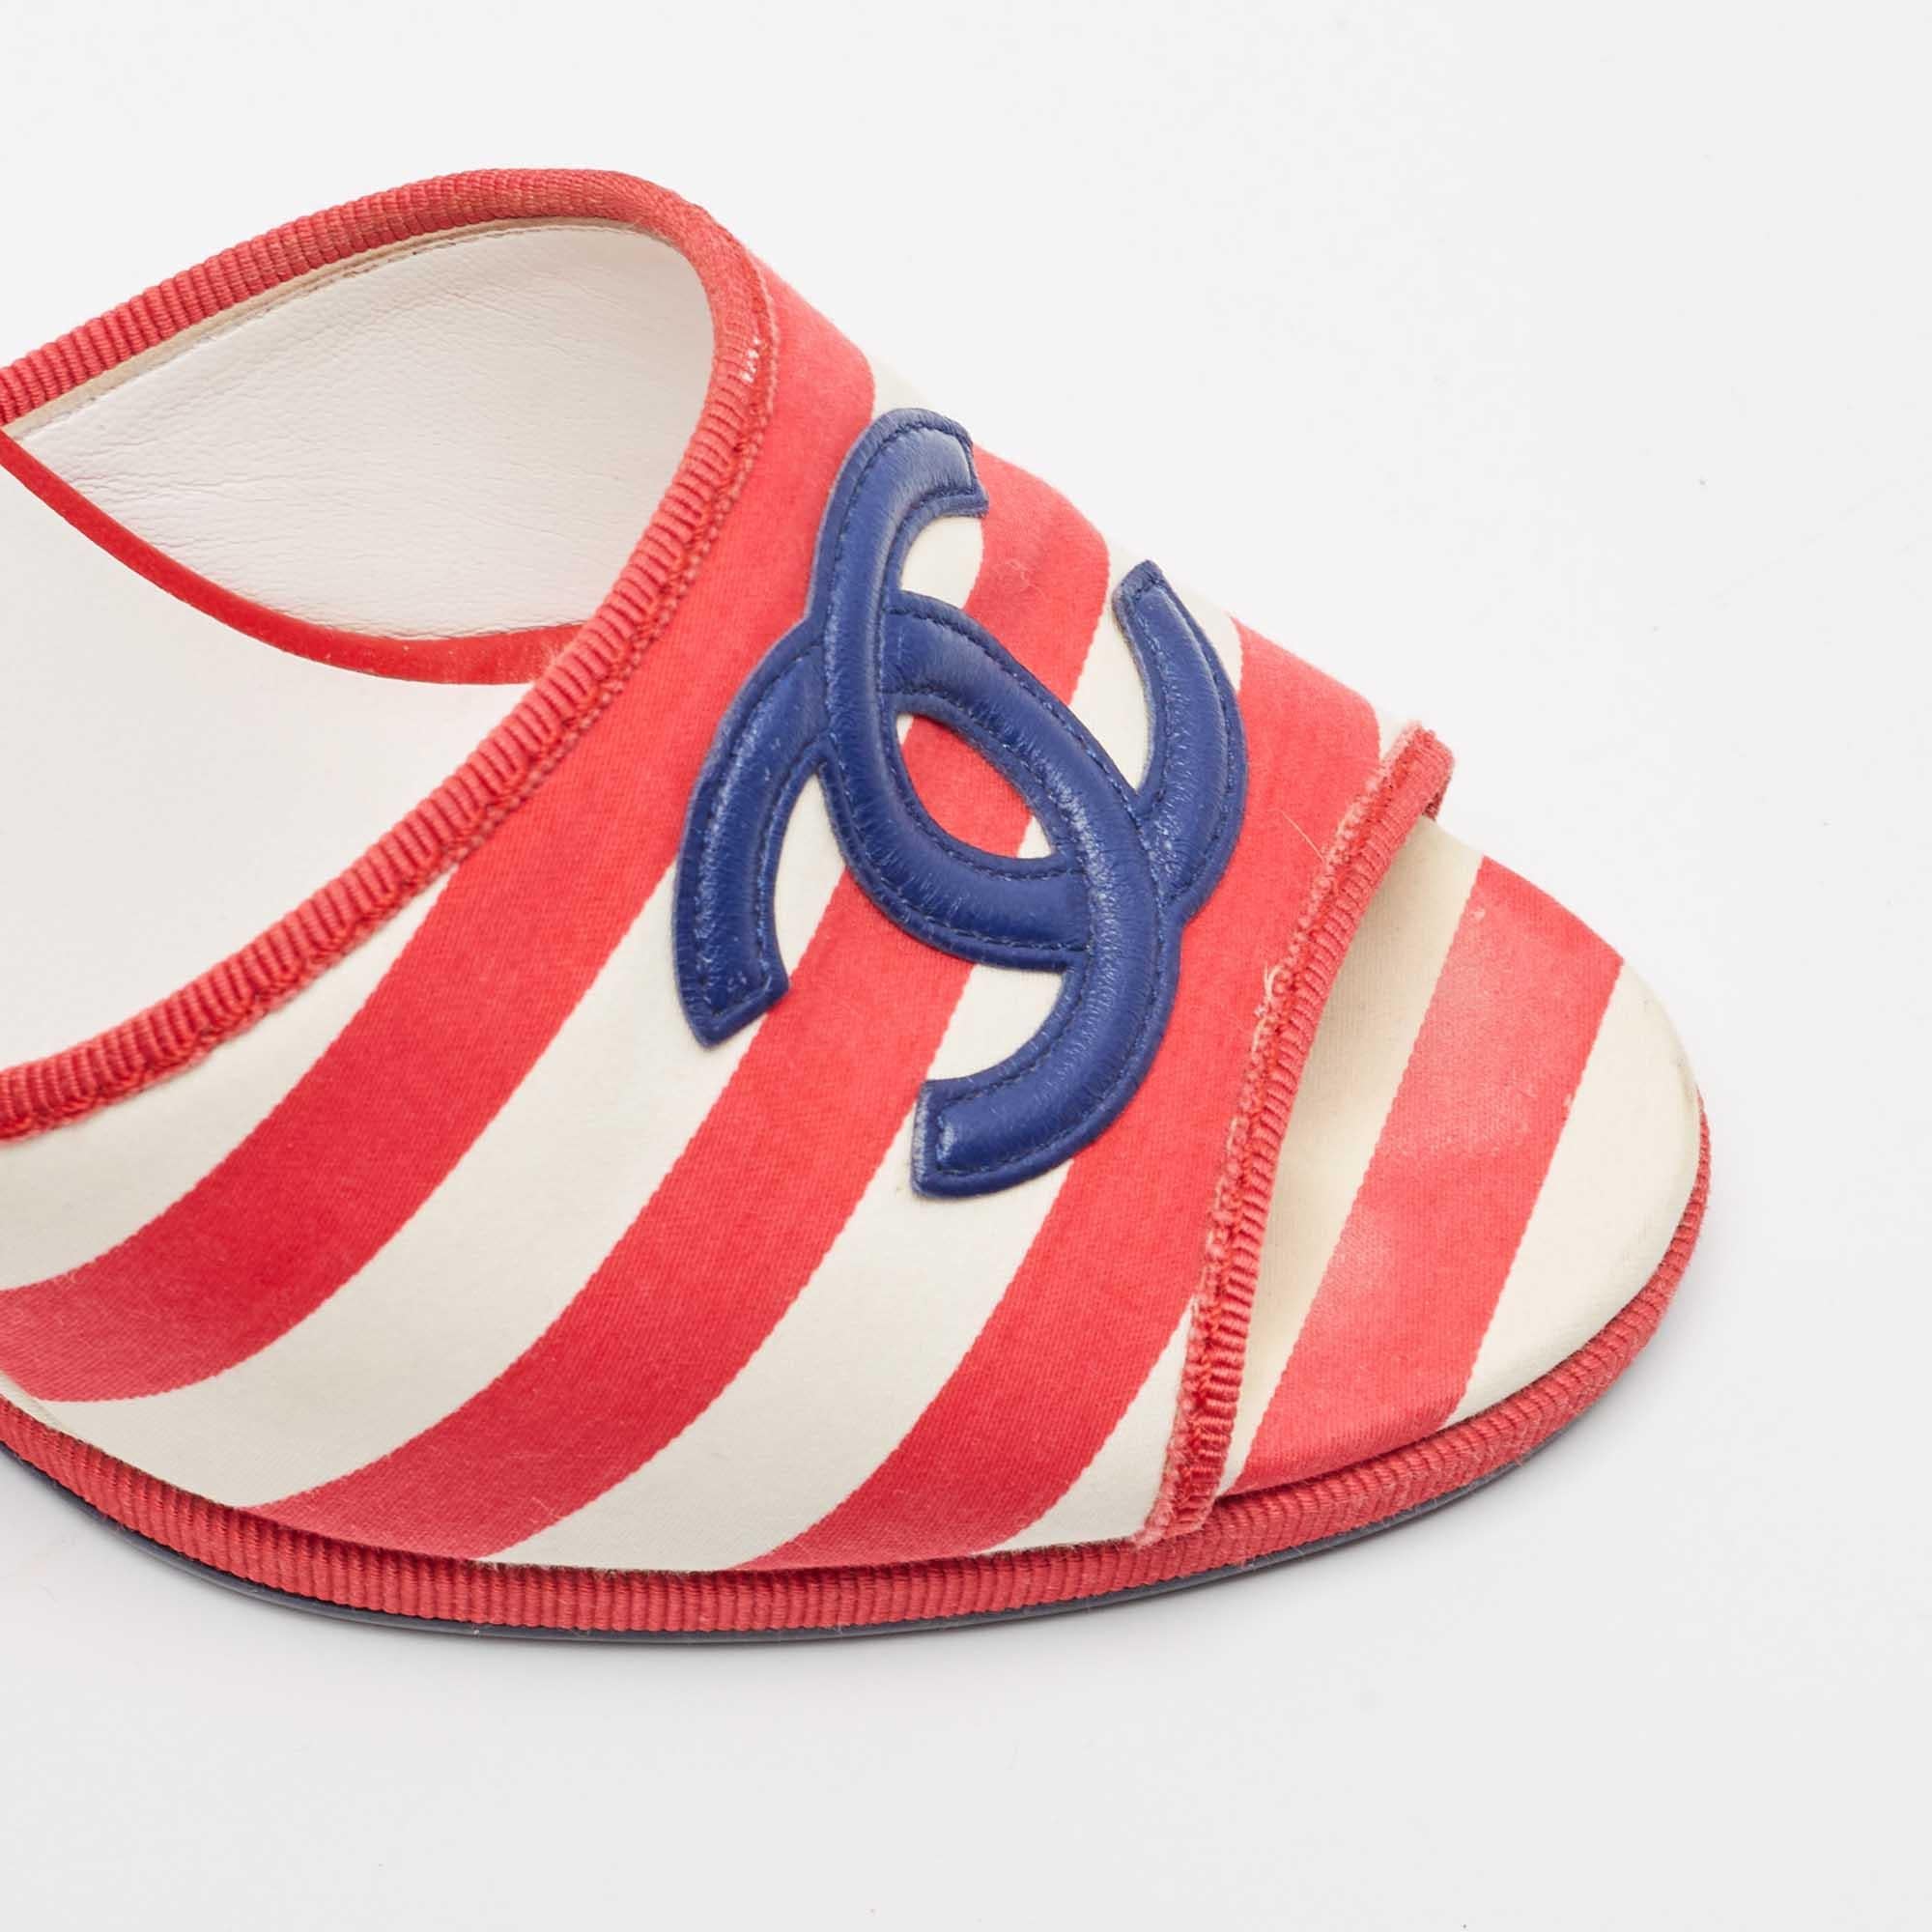 Women's Chanel Red/White Canvas CC Stripe Wedge Sandals Size 37